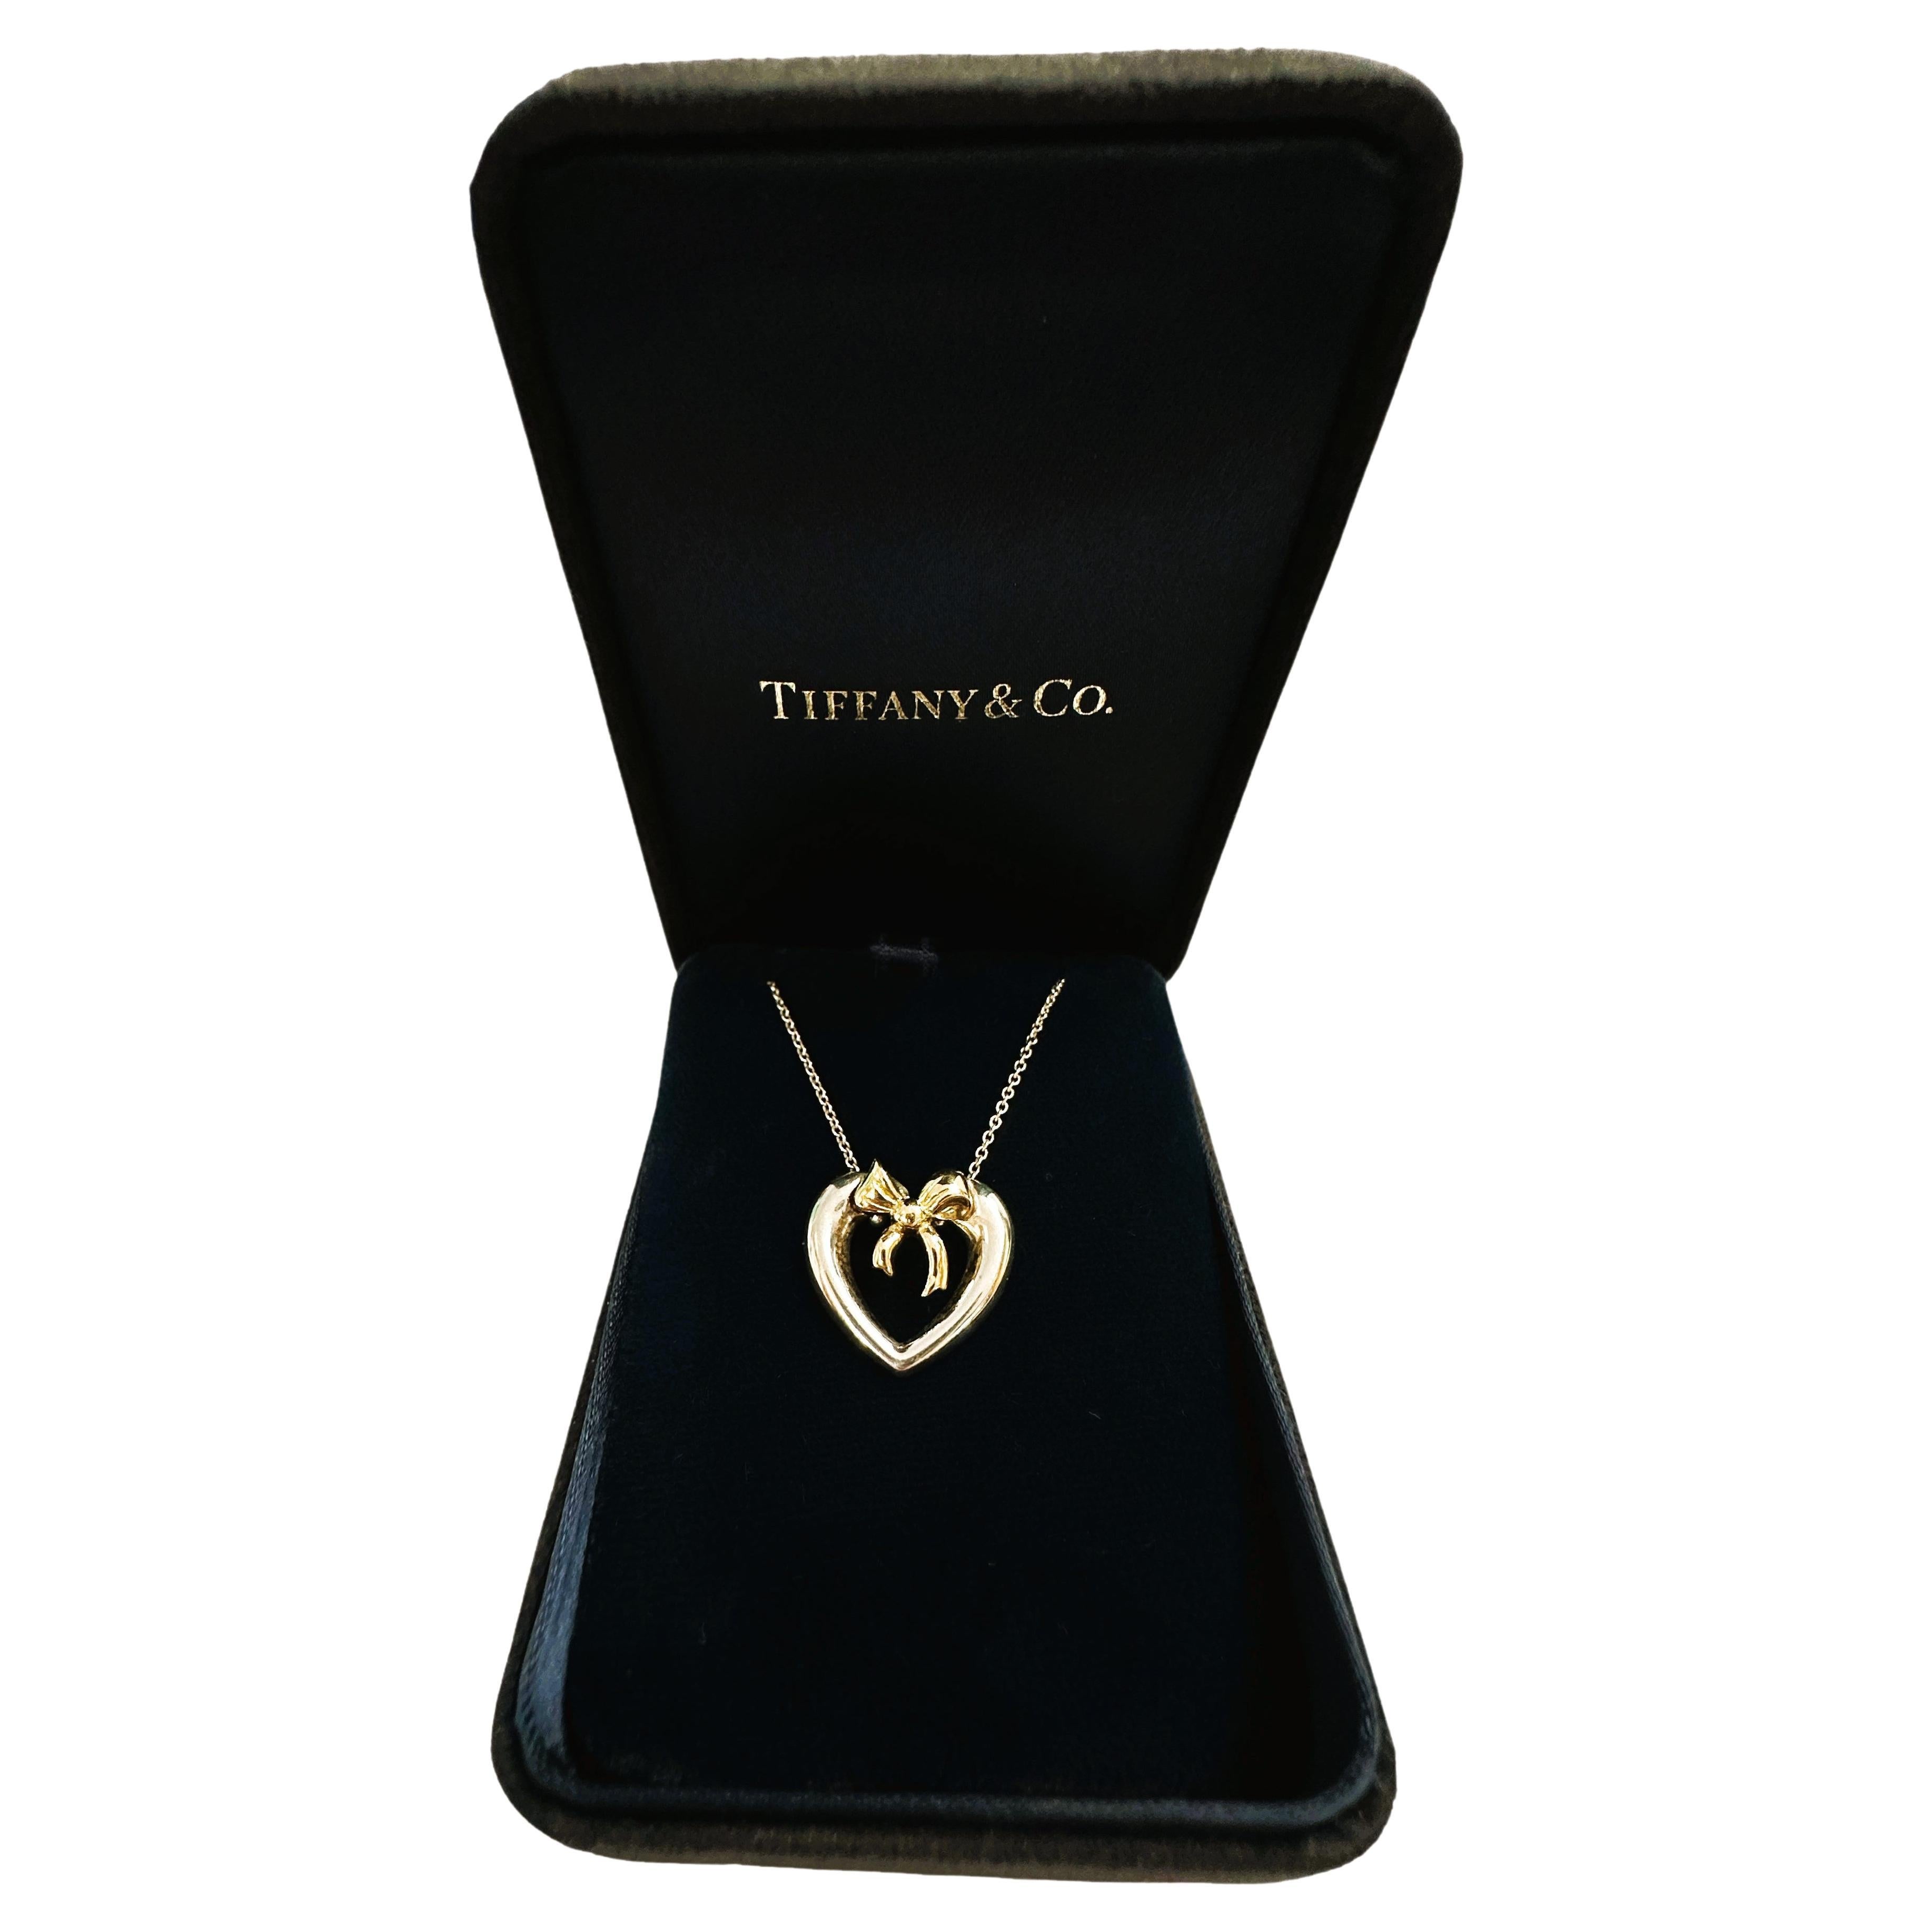 This is a very nice pre-owned Tiffany necklace.  The chain is stamped 